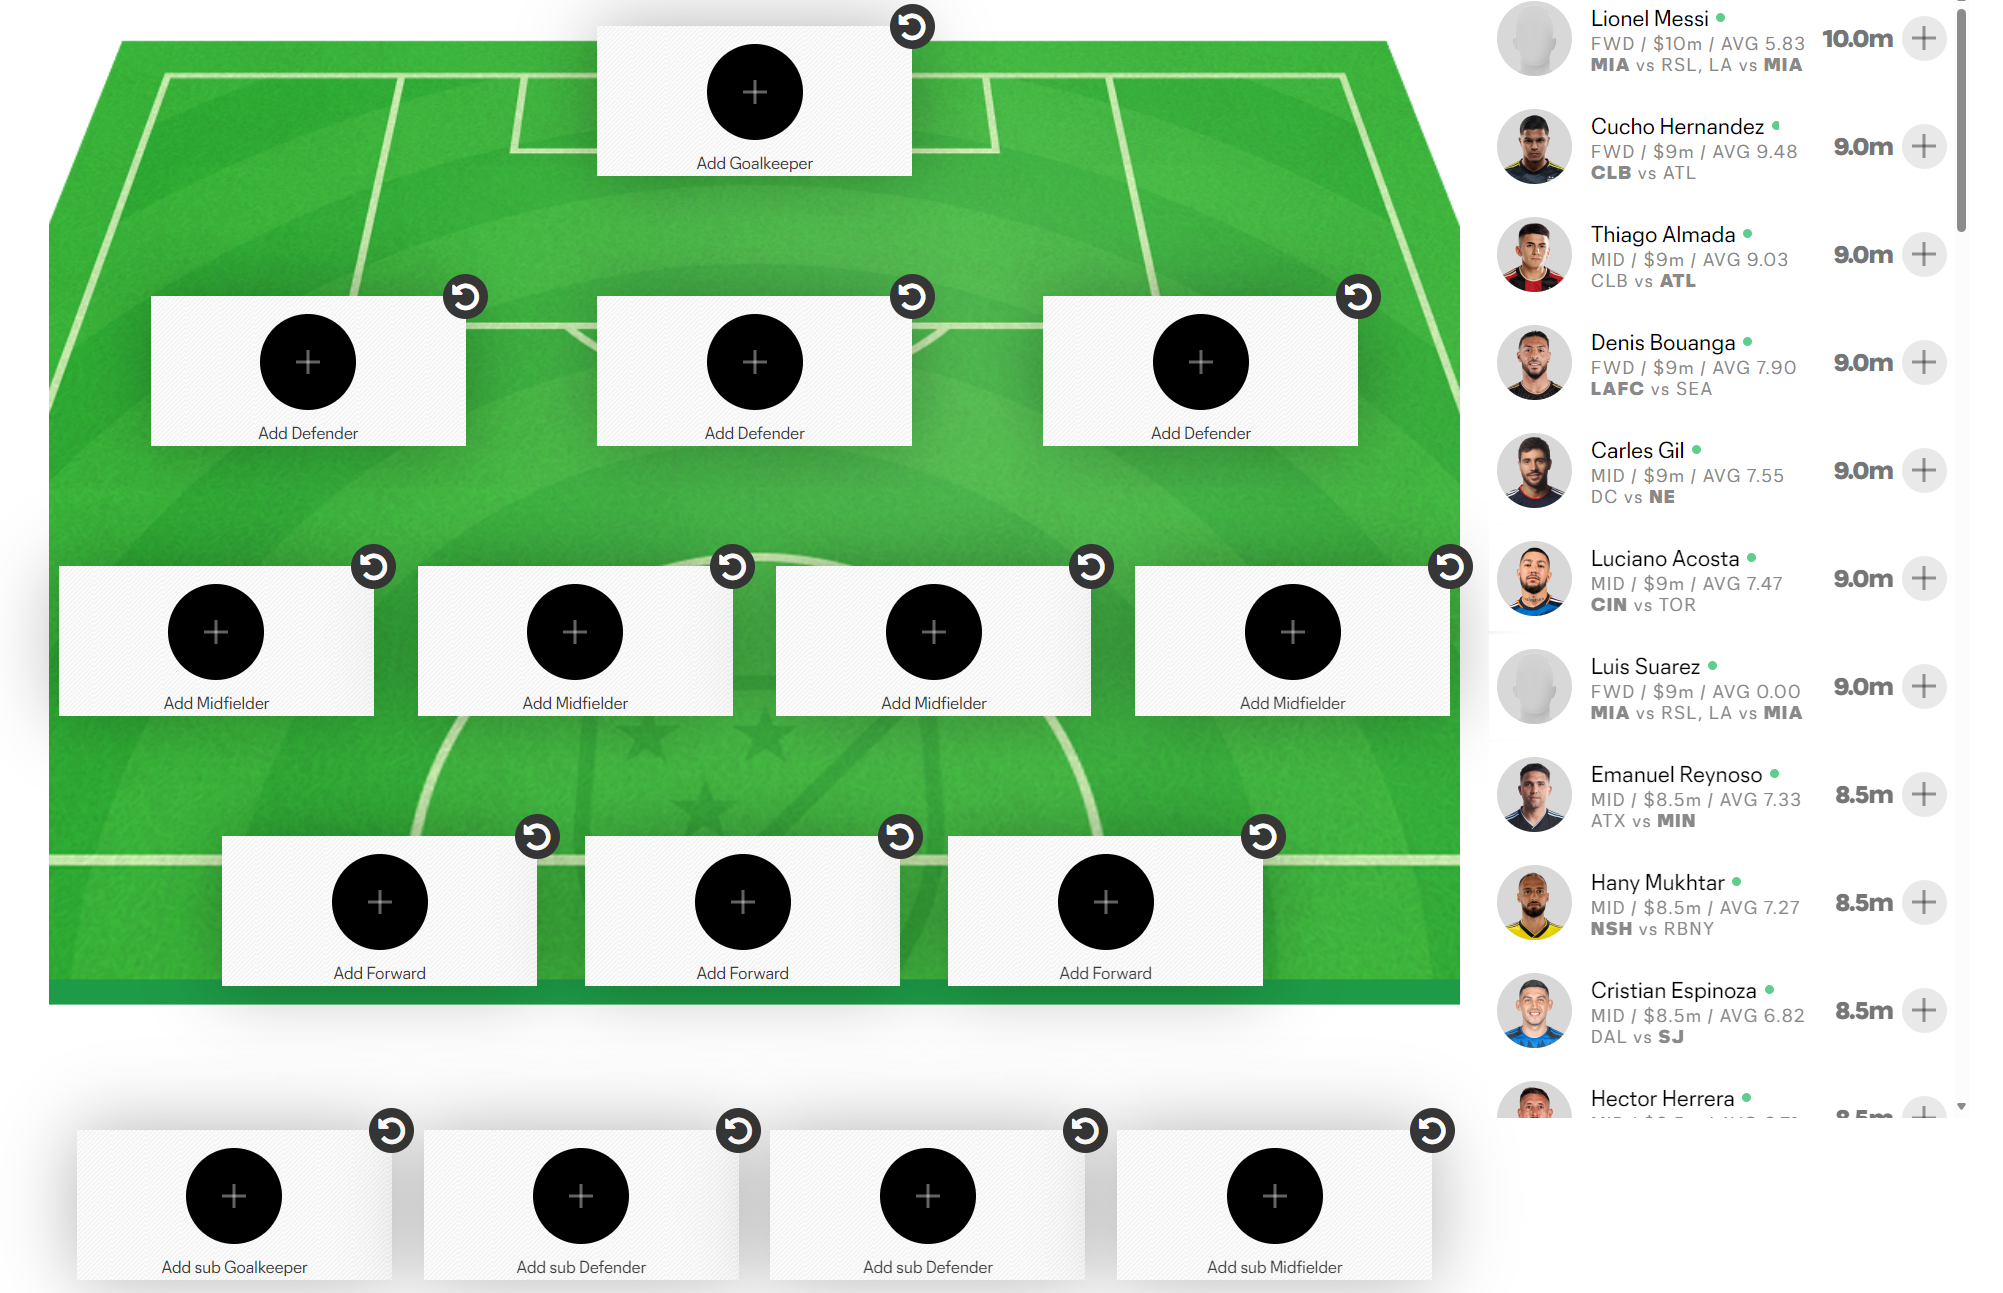 Screenshot showing a lineup page for MLS Fantasy Soccer, with empty positions for 11 players, 4 bench slots, and list of available players on the right.